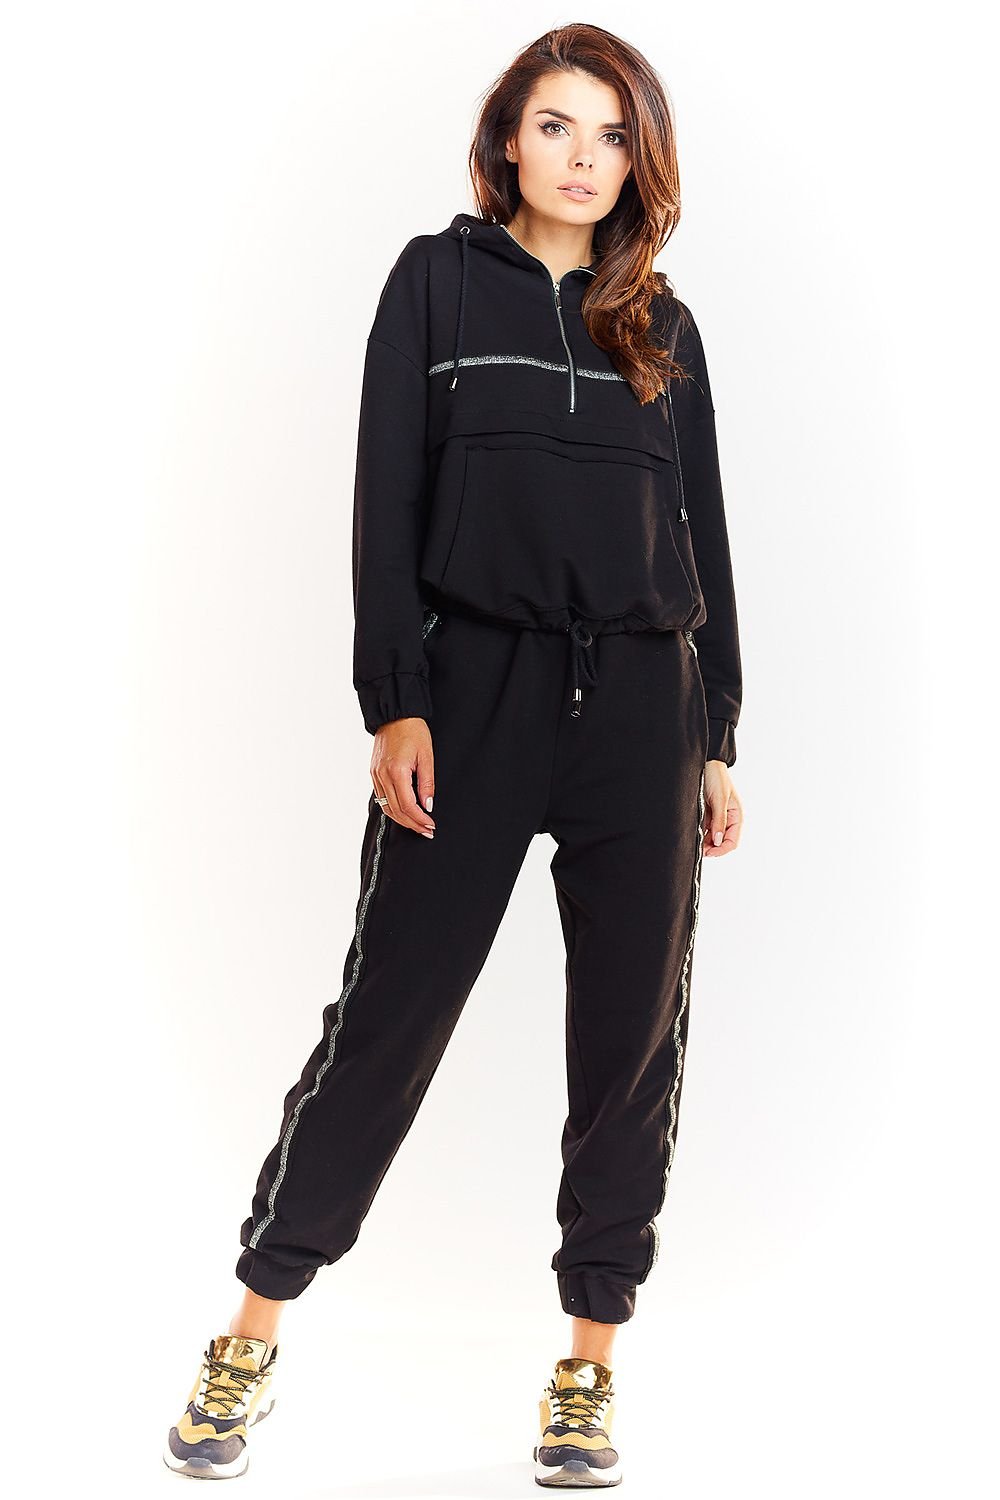 Tracksuit trousers model 139600 Infinite You Women`s Tracksuit Bottoms ...